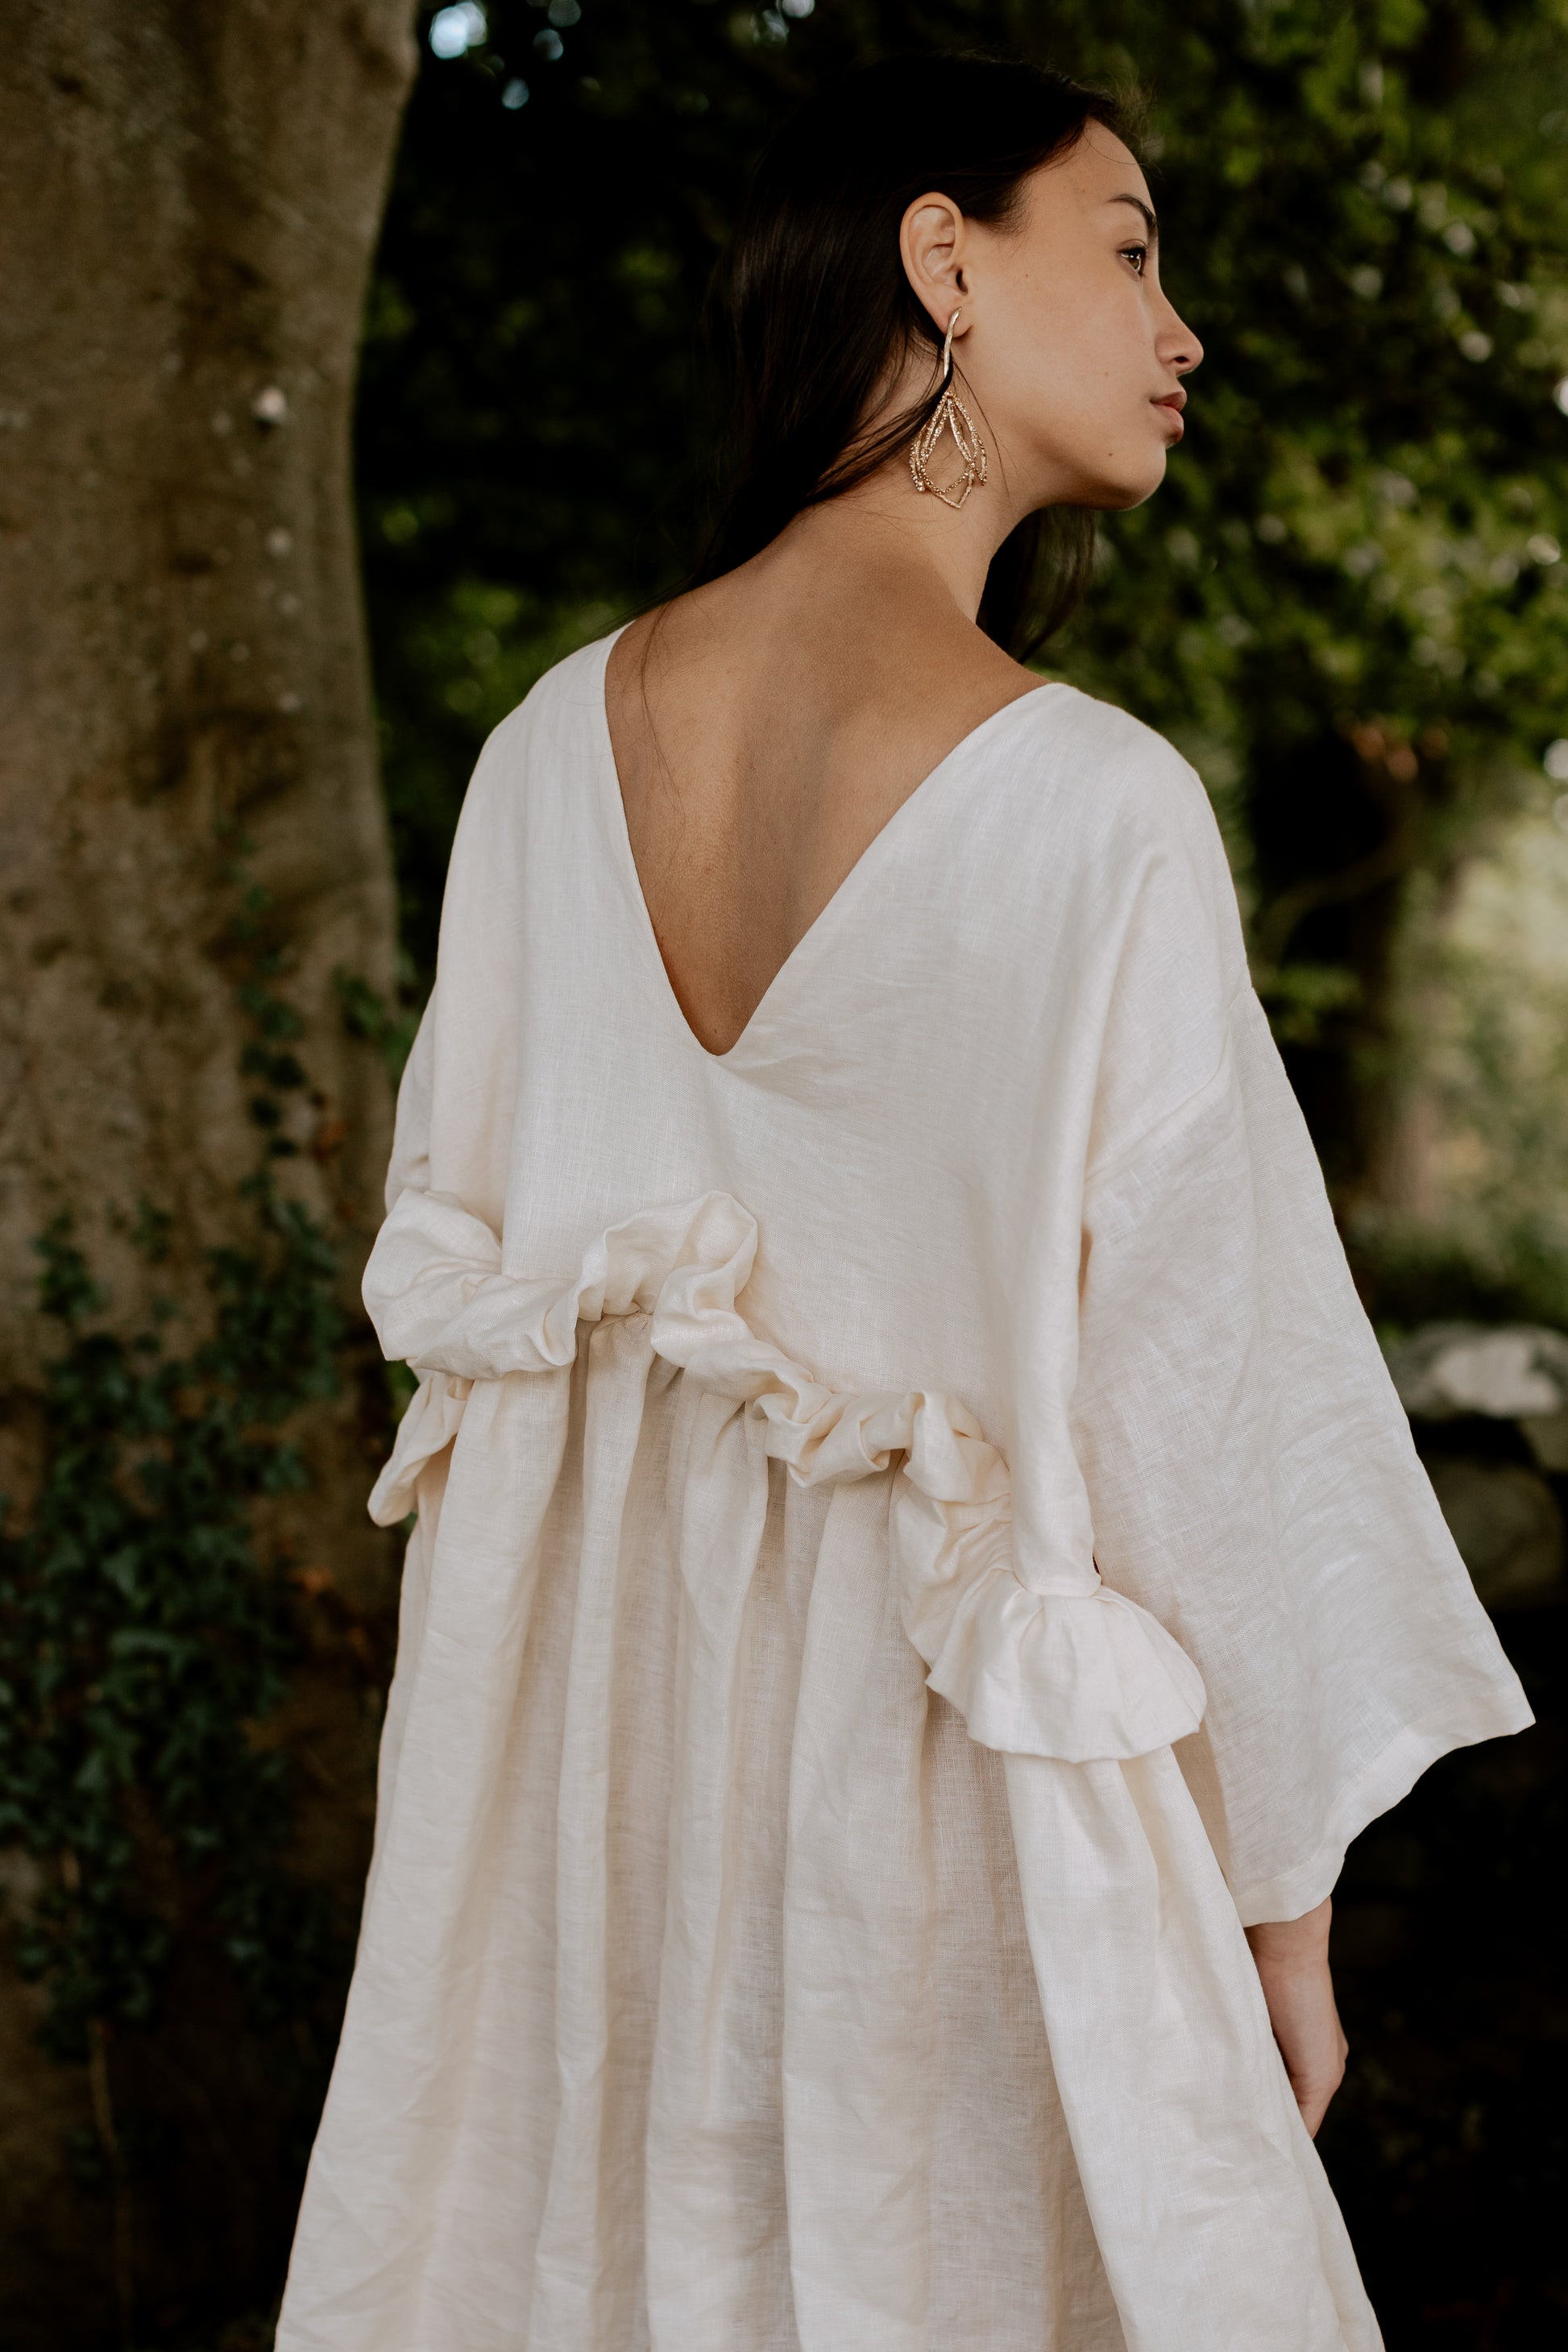 THE PUFF DRESS | MALLOW | Our playful party dress this season.An effortless and feminine silhouette with a playful burst of puffed linen at the waist. Can be worn both ways, with 'V' to the front or back. The 'mallow' colourway features a subtle line of g